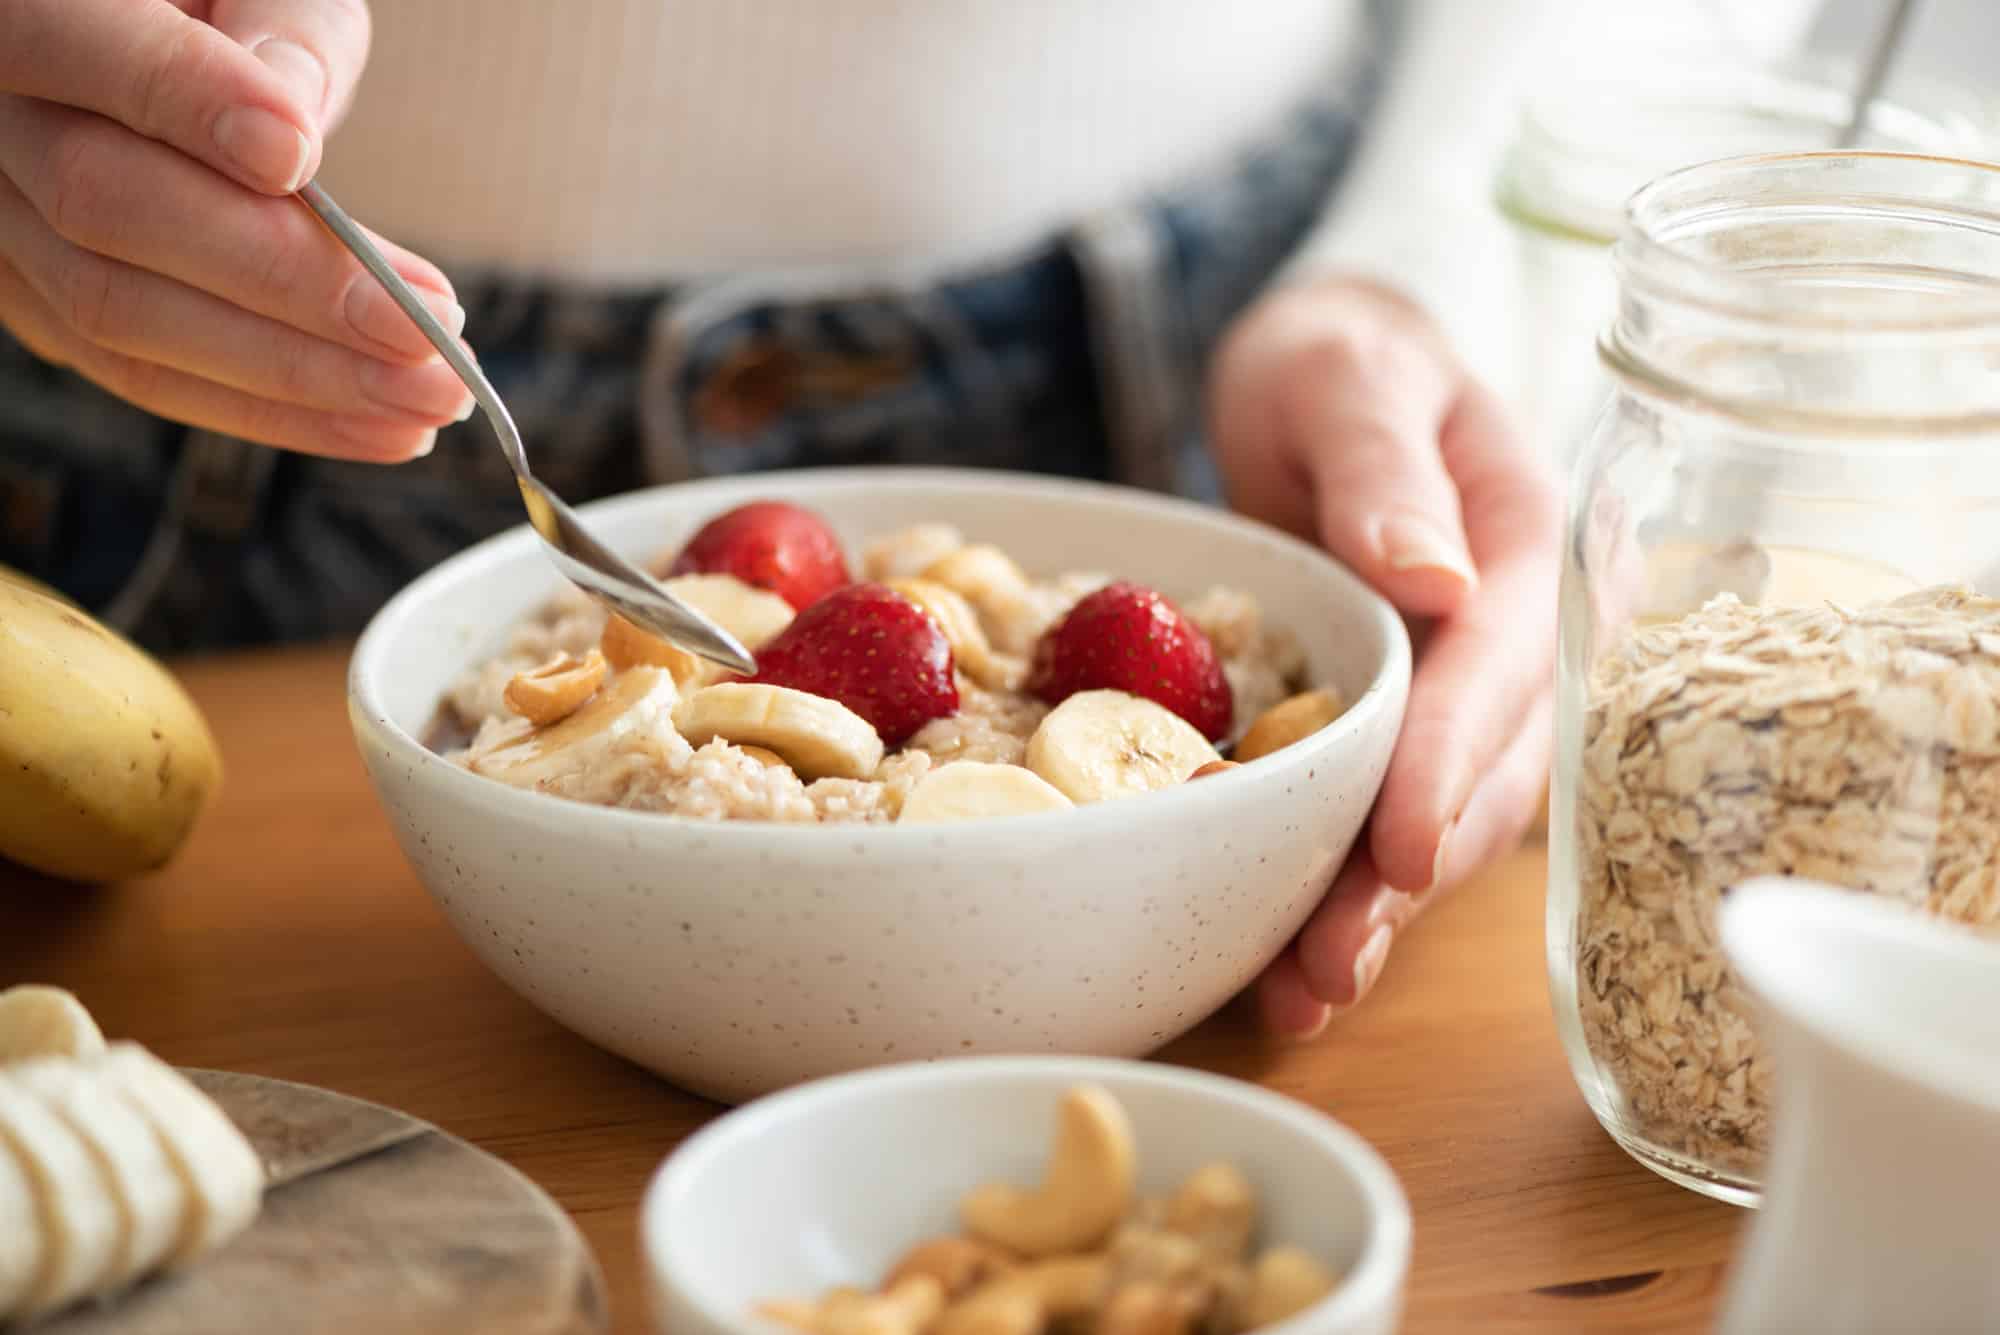 Health Benefits Of Eating Oats And Oatmeal